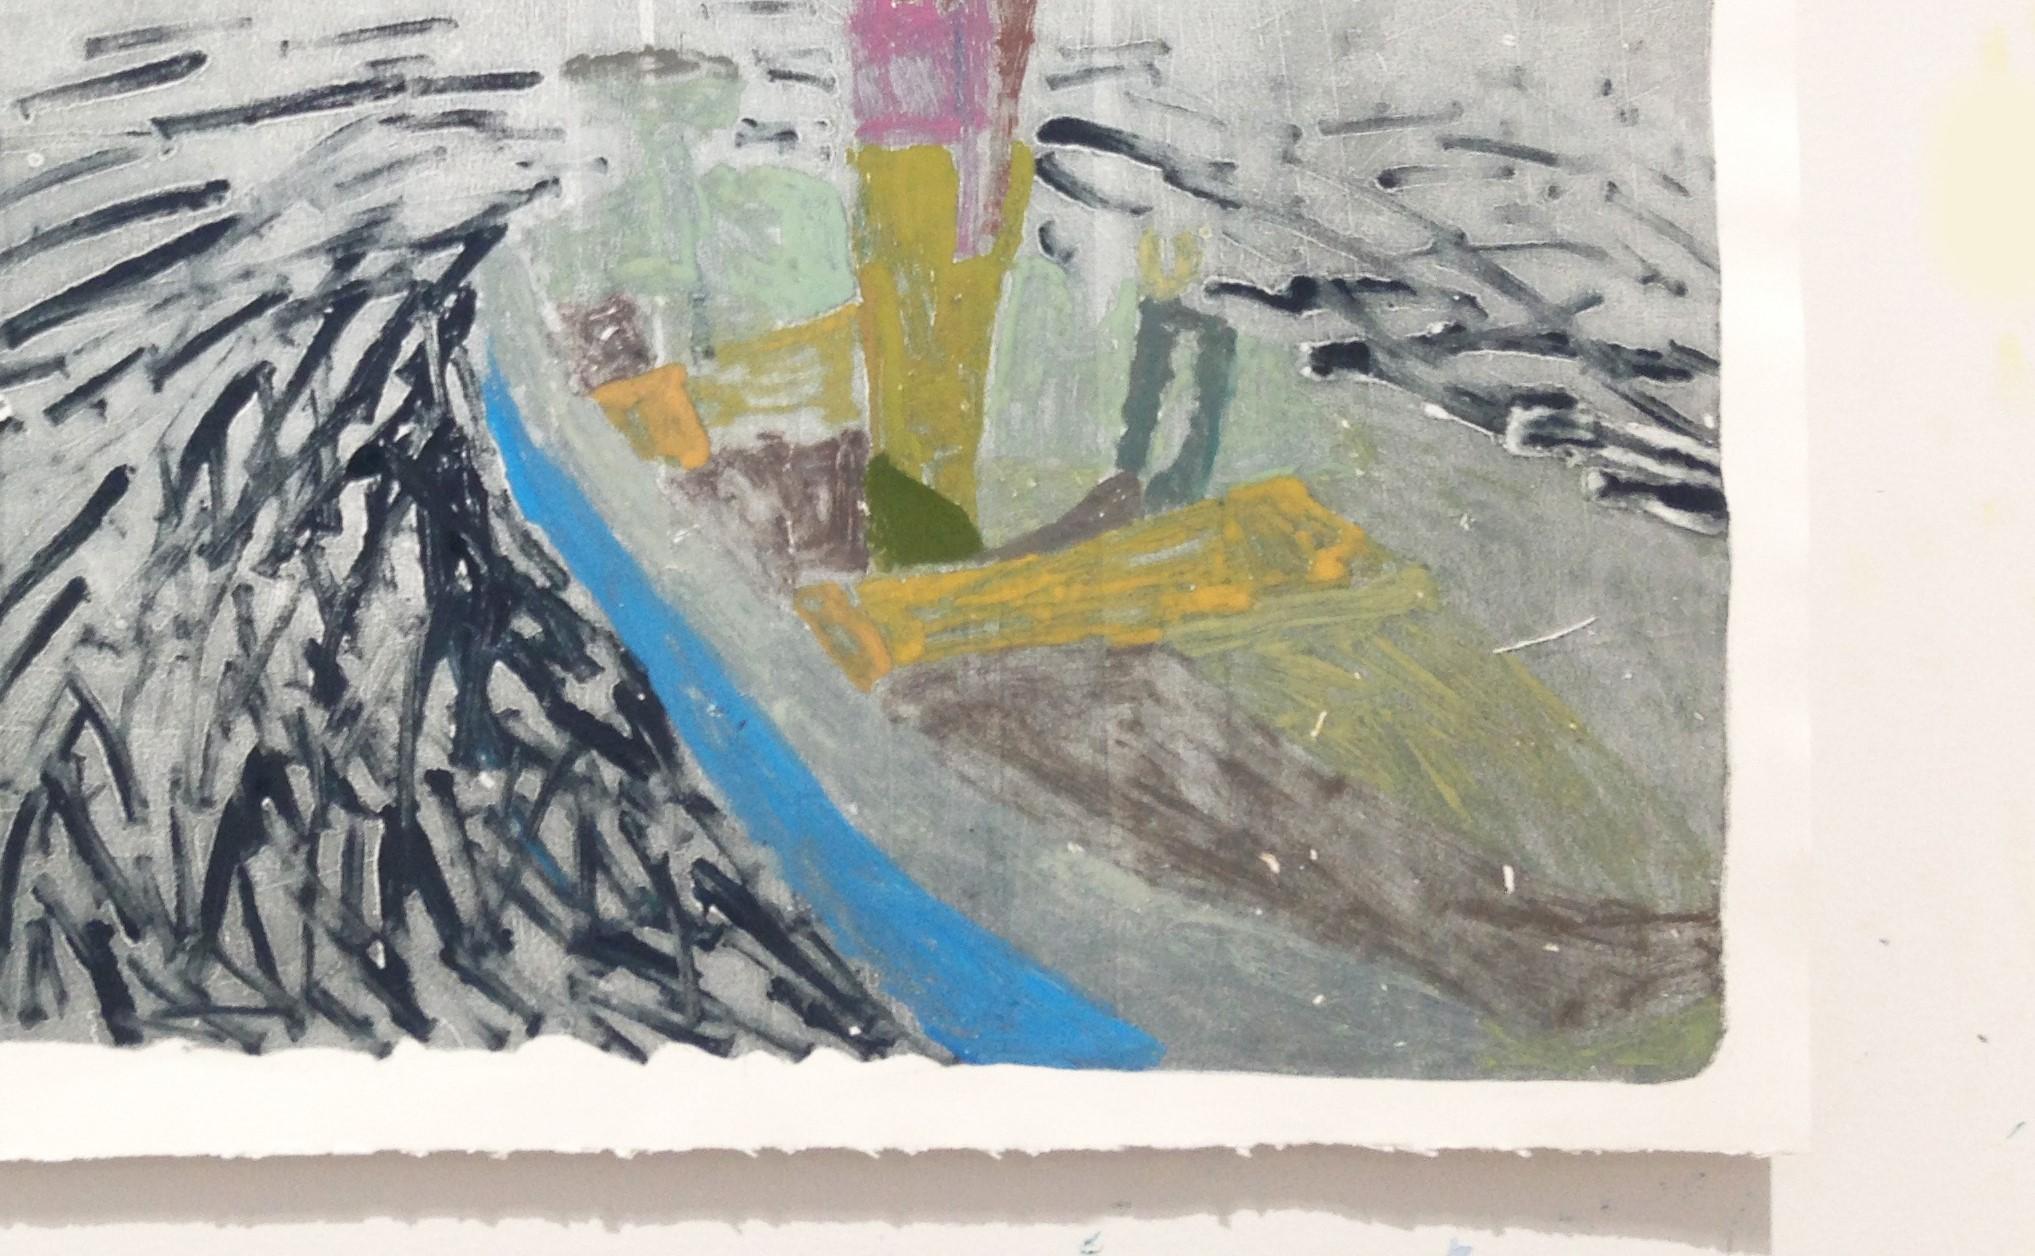 A figure clad in a pink shirt and greenish yellow pants stands in a solitary blue boat with yellow seats floating in water at night in this monotype by artist Sophie Treppendahl. The boat makes navy blue ripples throughout the gray water that